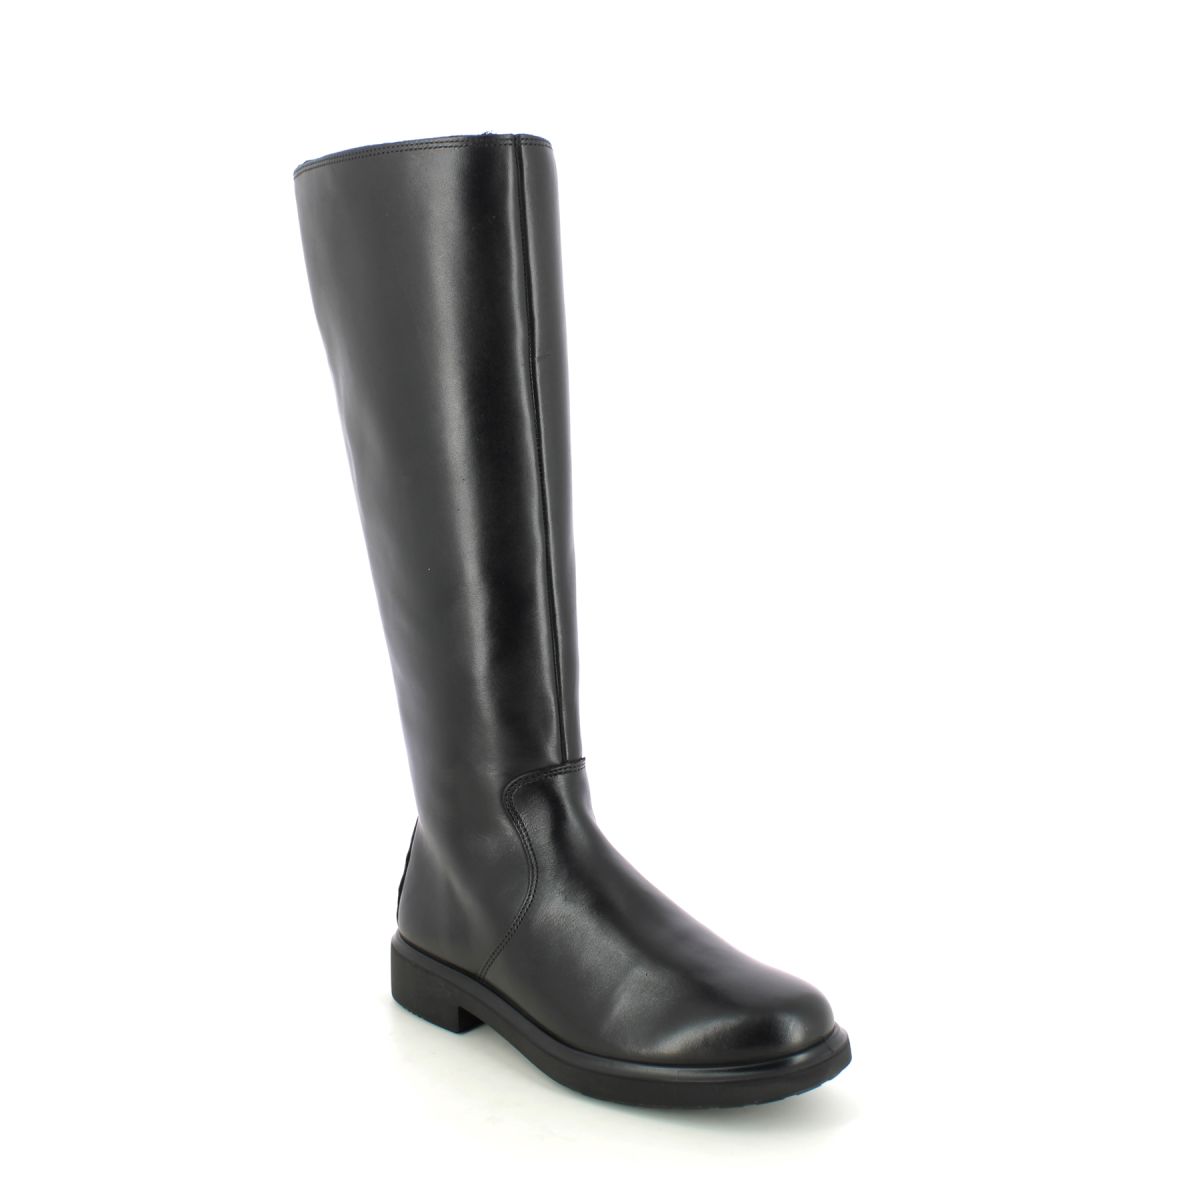 Ecco Amsterdam Metropole Tex Black Leather Womens Knee-High Boots 222023-01001 In Size 42 In Plain Black Leather